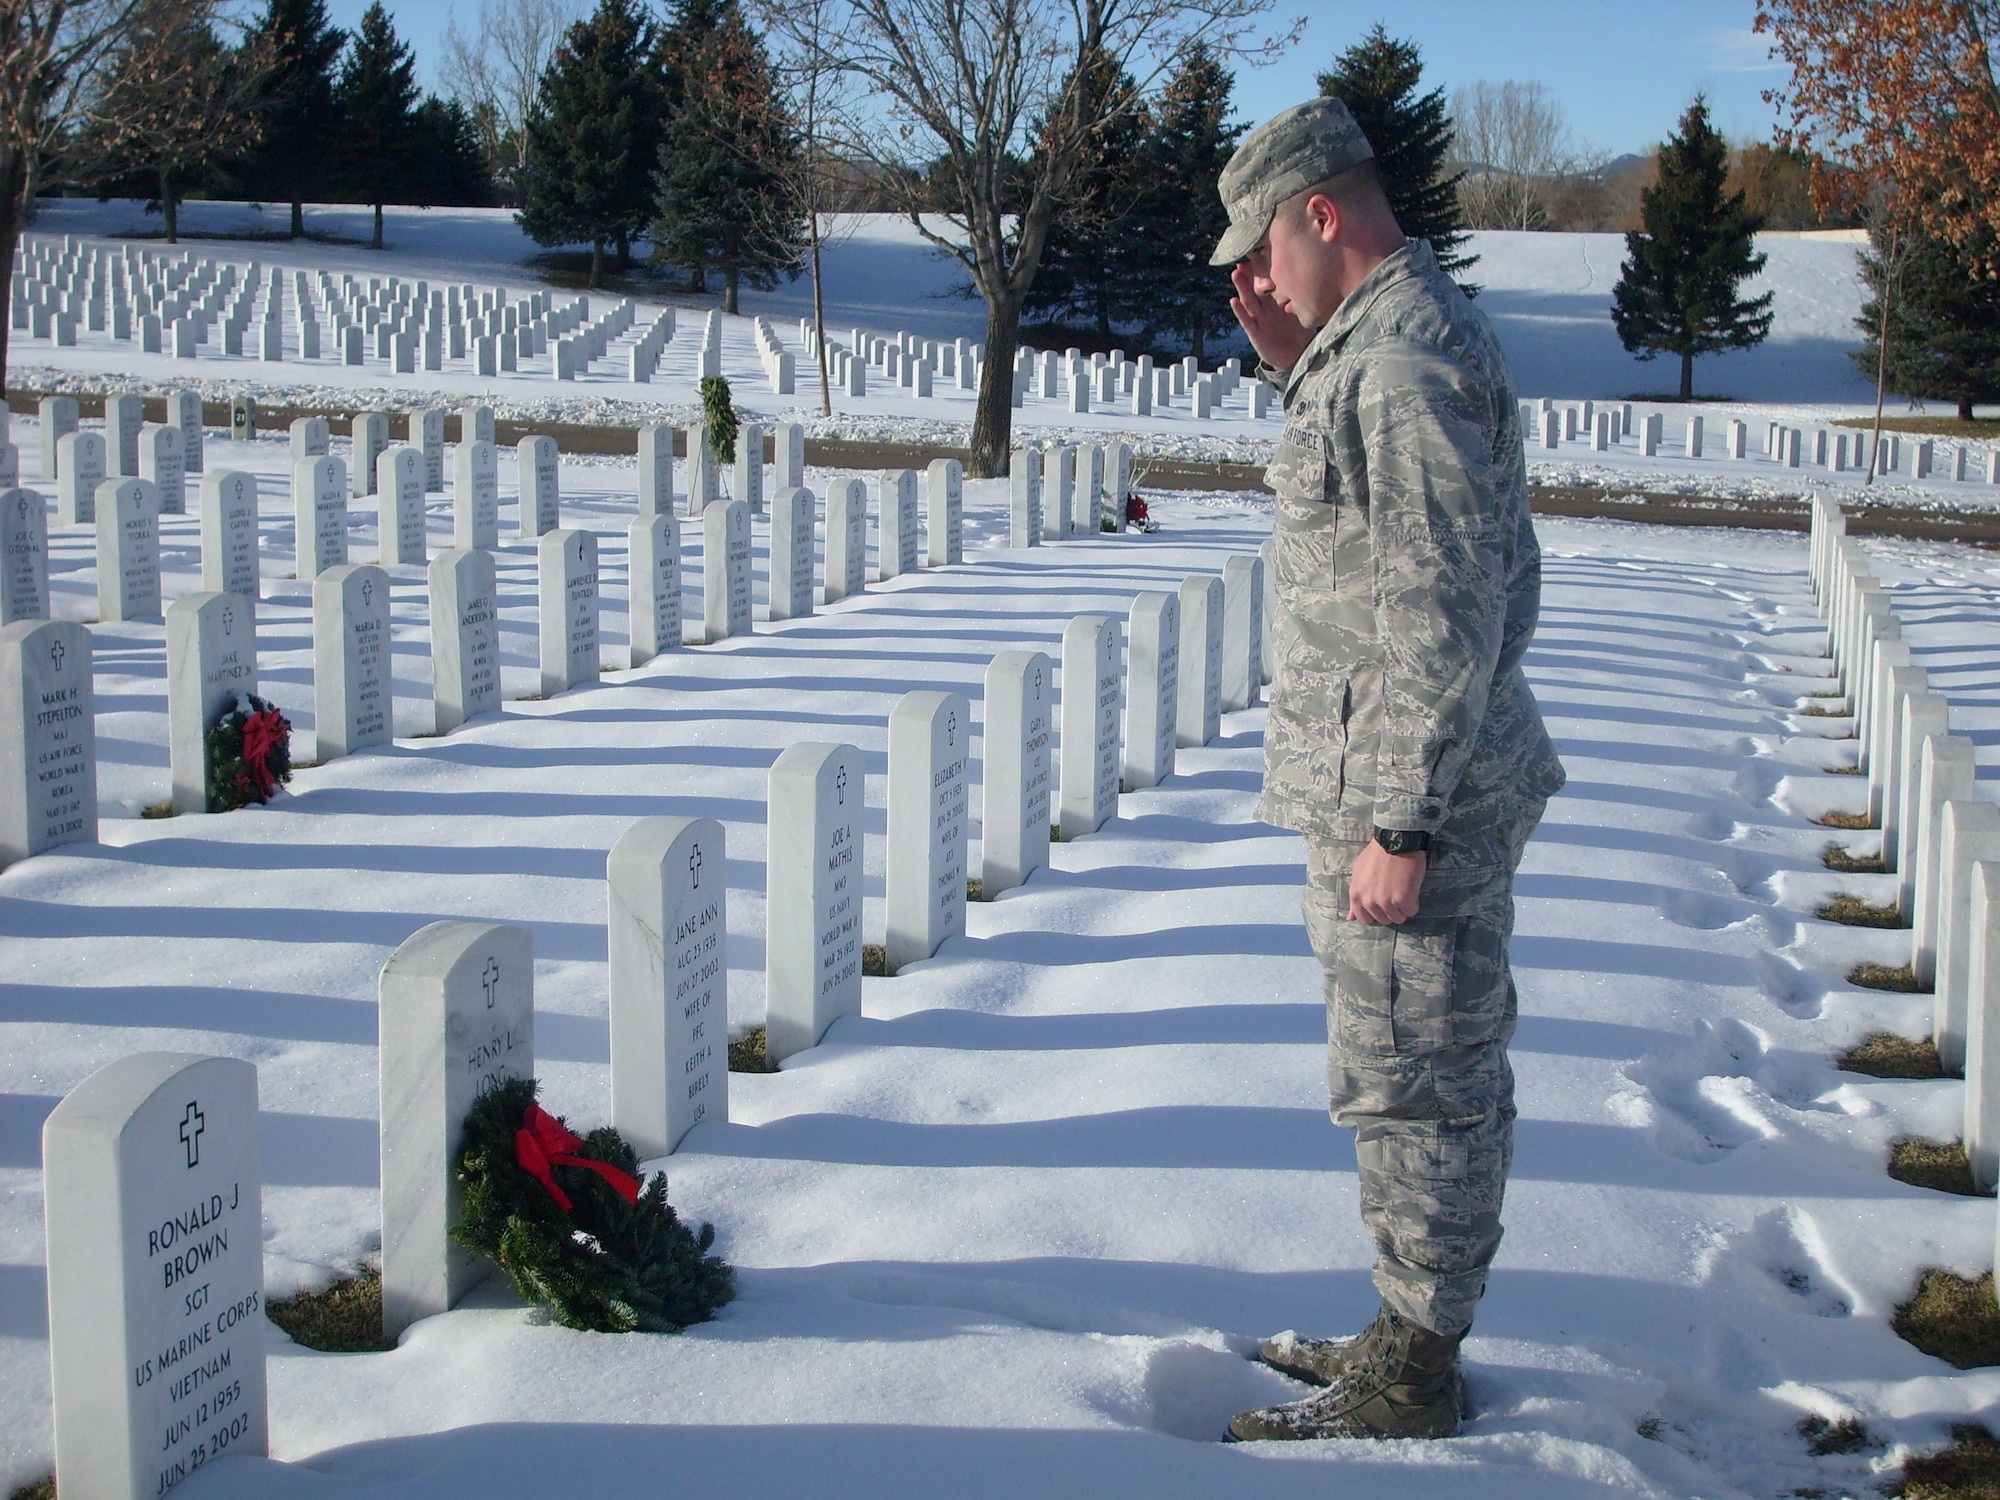 1st Lt. Brandon Goebel places a wreath on the grave of Navy Seaman Apprentice Henry L. Long. Seaman Long's family requested Lieutenant Goebel visit the grave during Wreaths Across America and place a wreath. (Photo courtesy of U.S. Air Force Master Sgt. Timothy O'Connor)